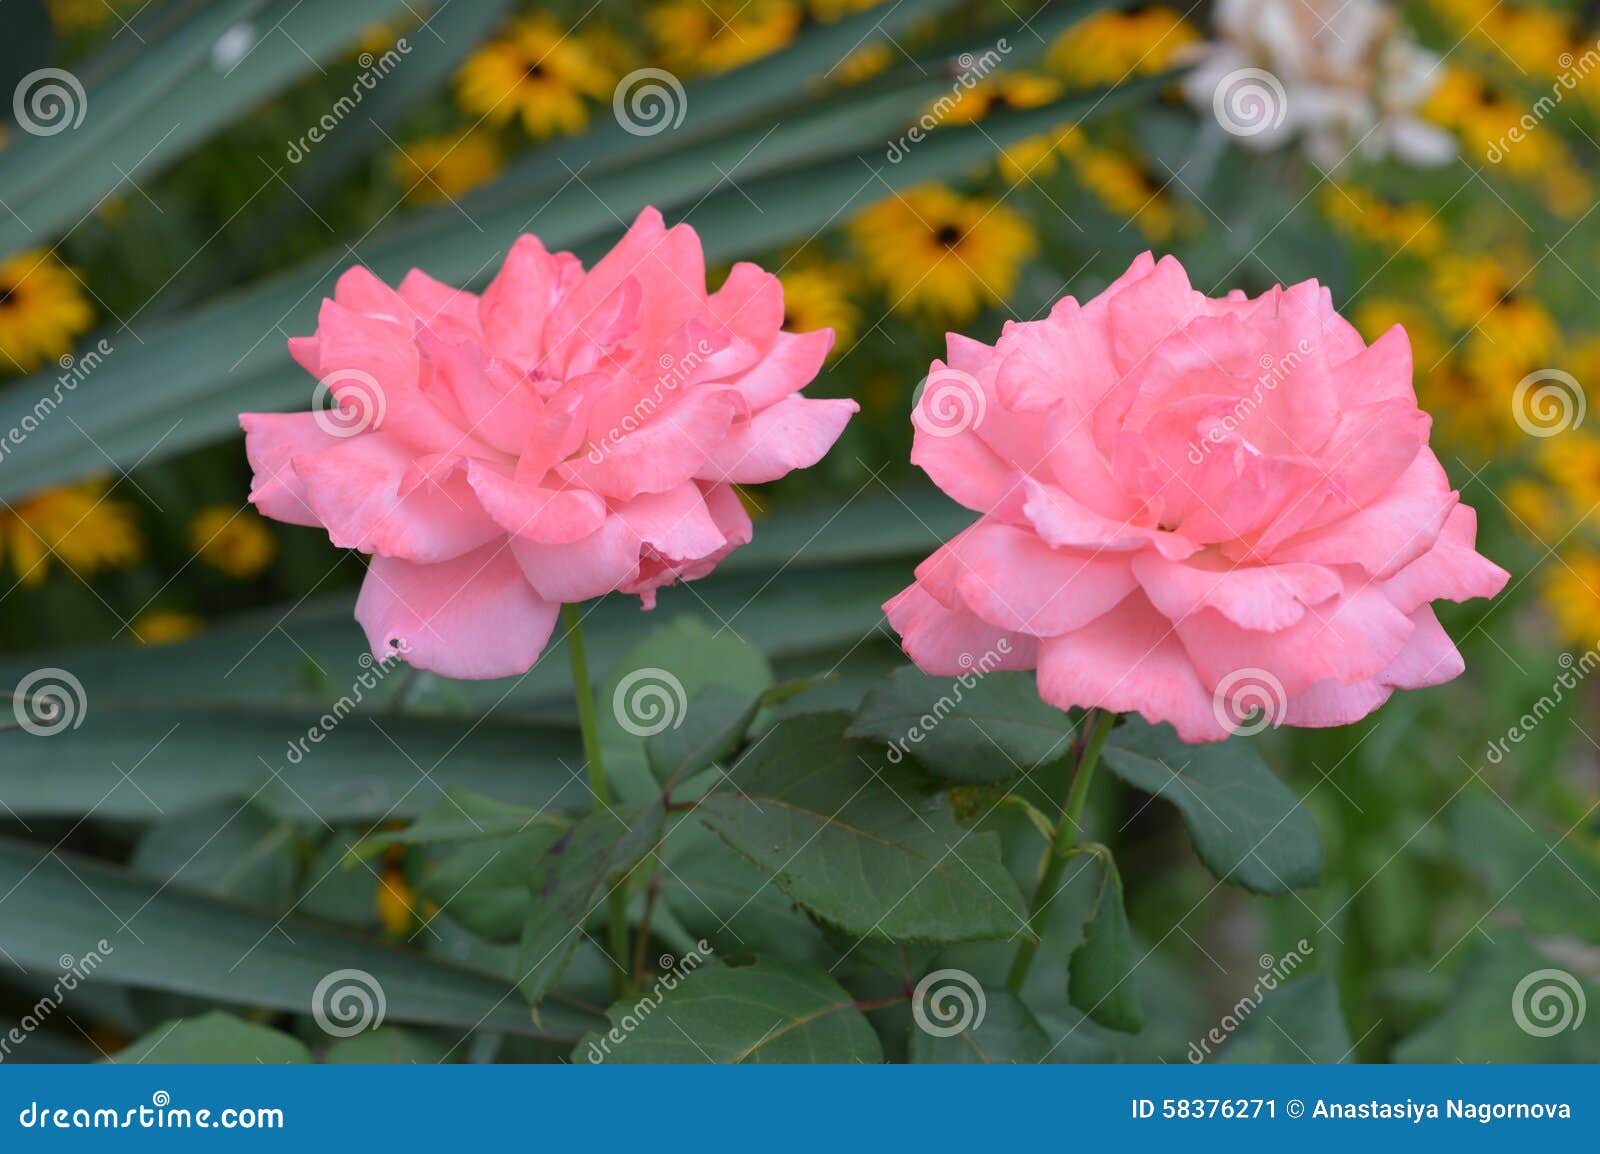 Two pink roses stock image. Image of spikes, background - 58376271